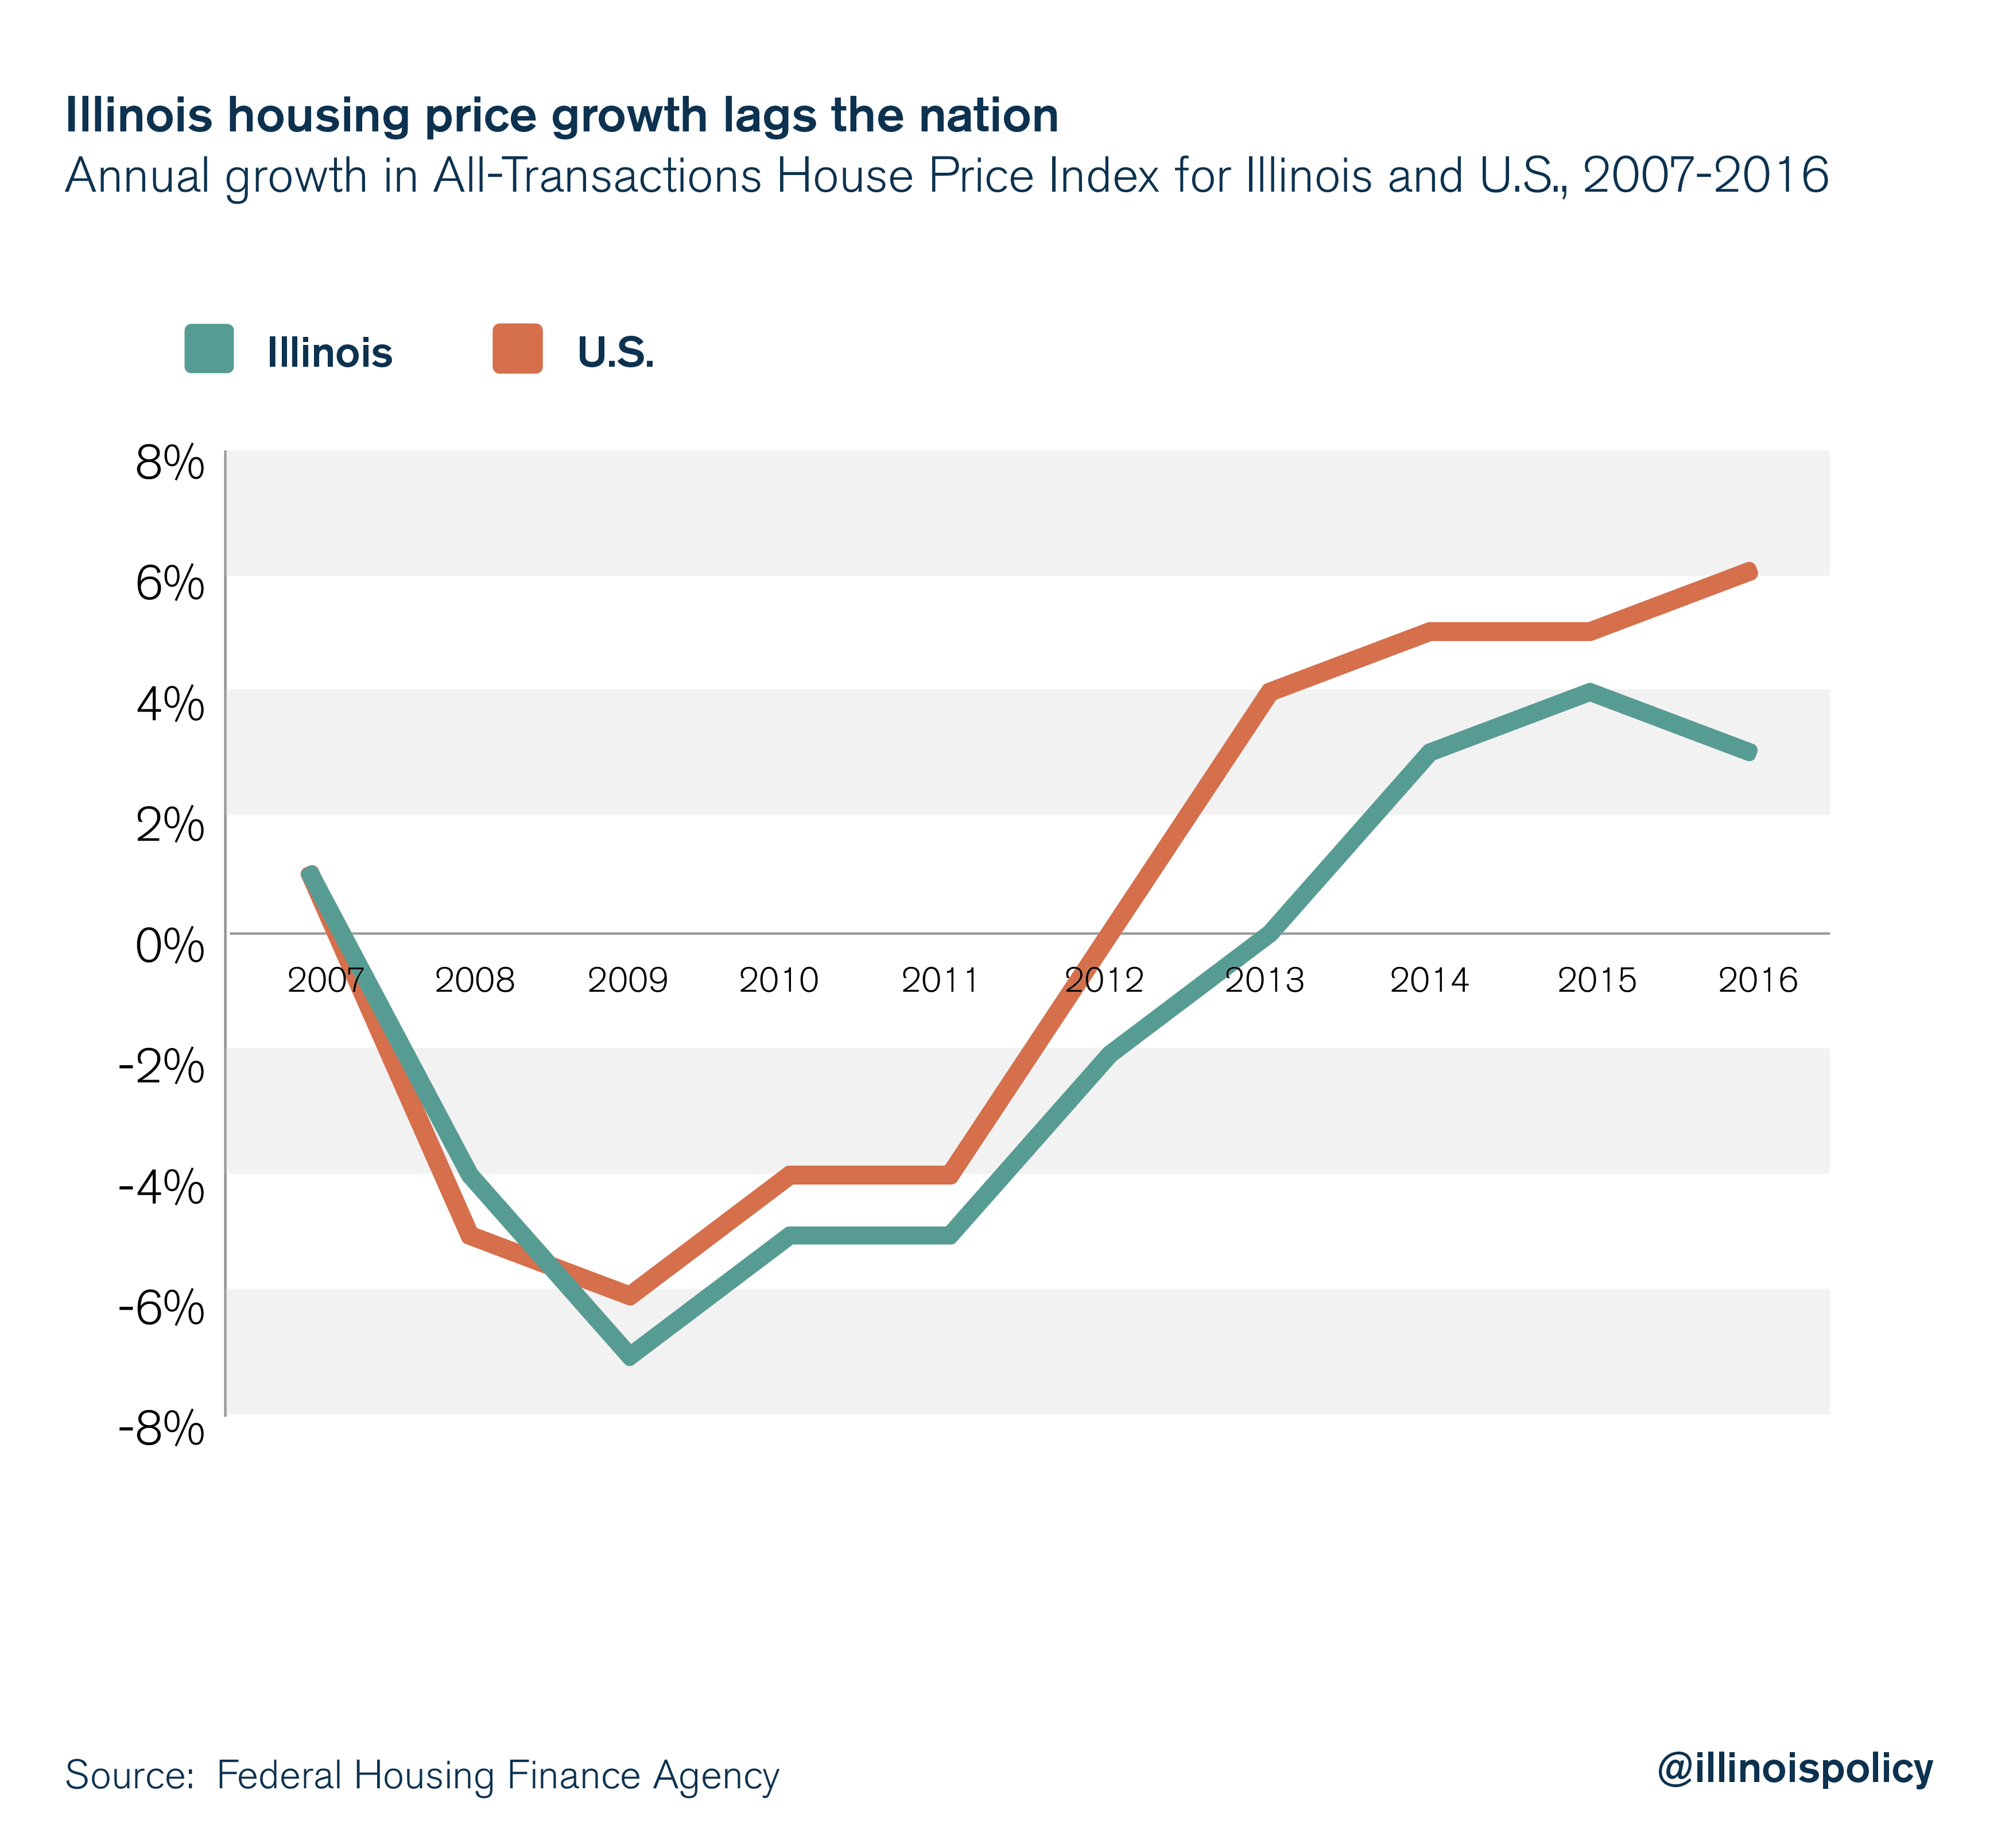 Illinois housing price growth lags the nation